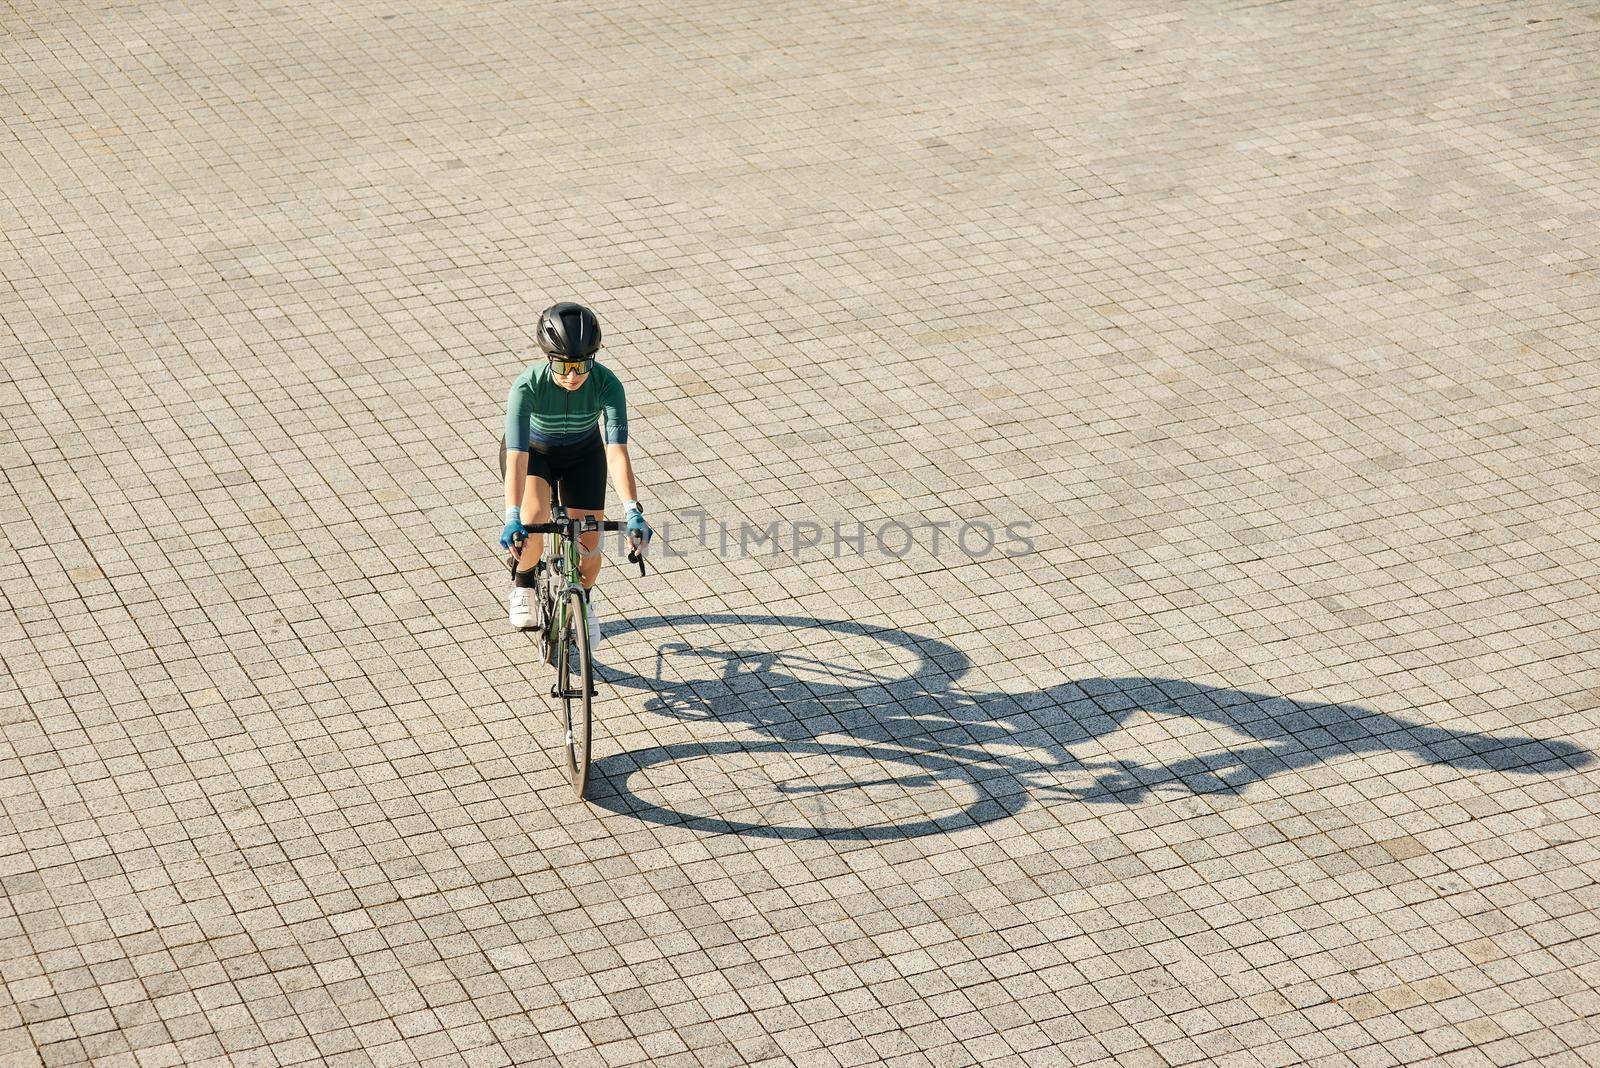 Aerial view shot of professional female cyclist in cycling garment and protective gear riding bicycle, training outdoors on a warm sunny day by friendsstock